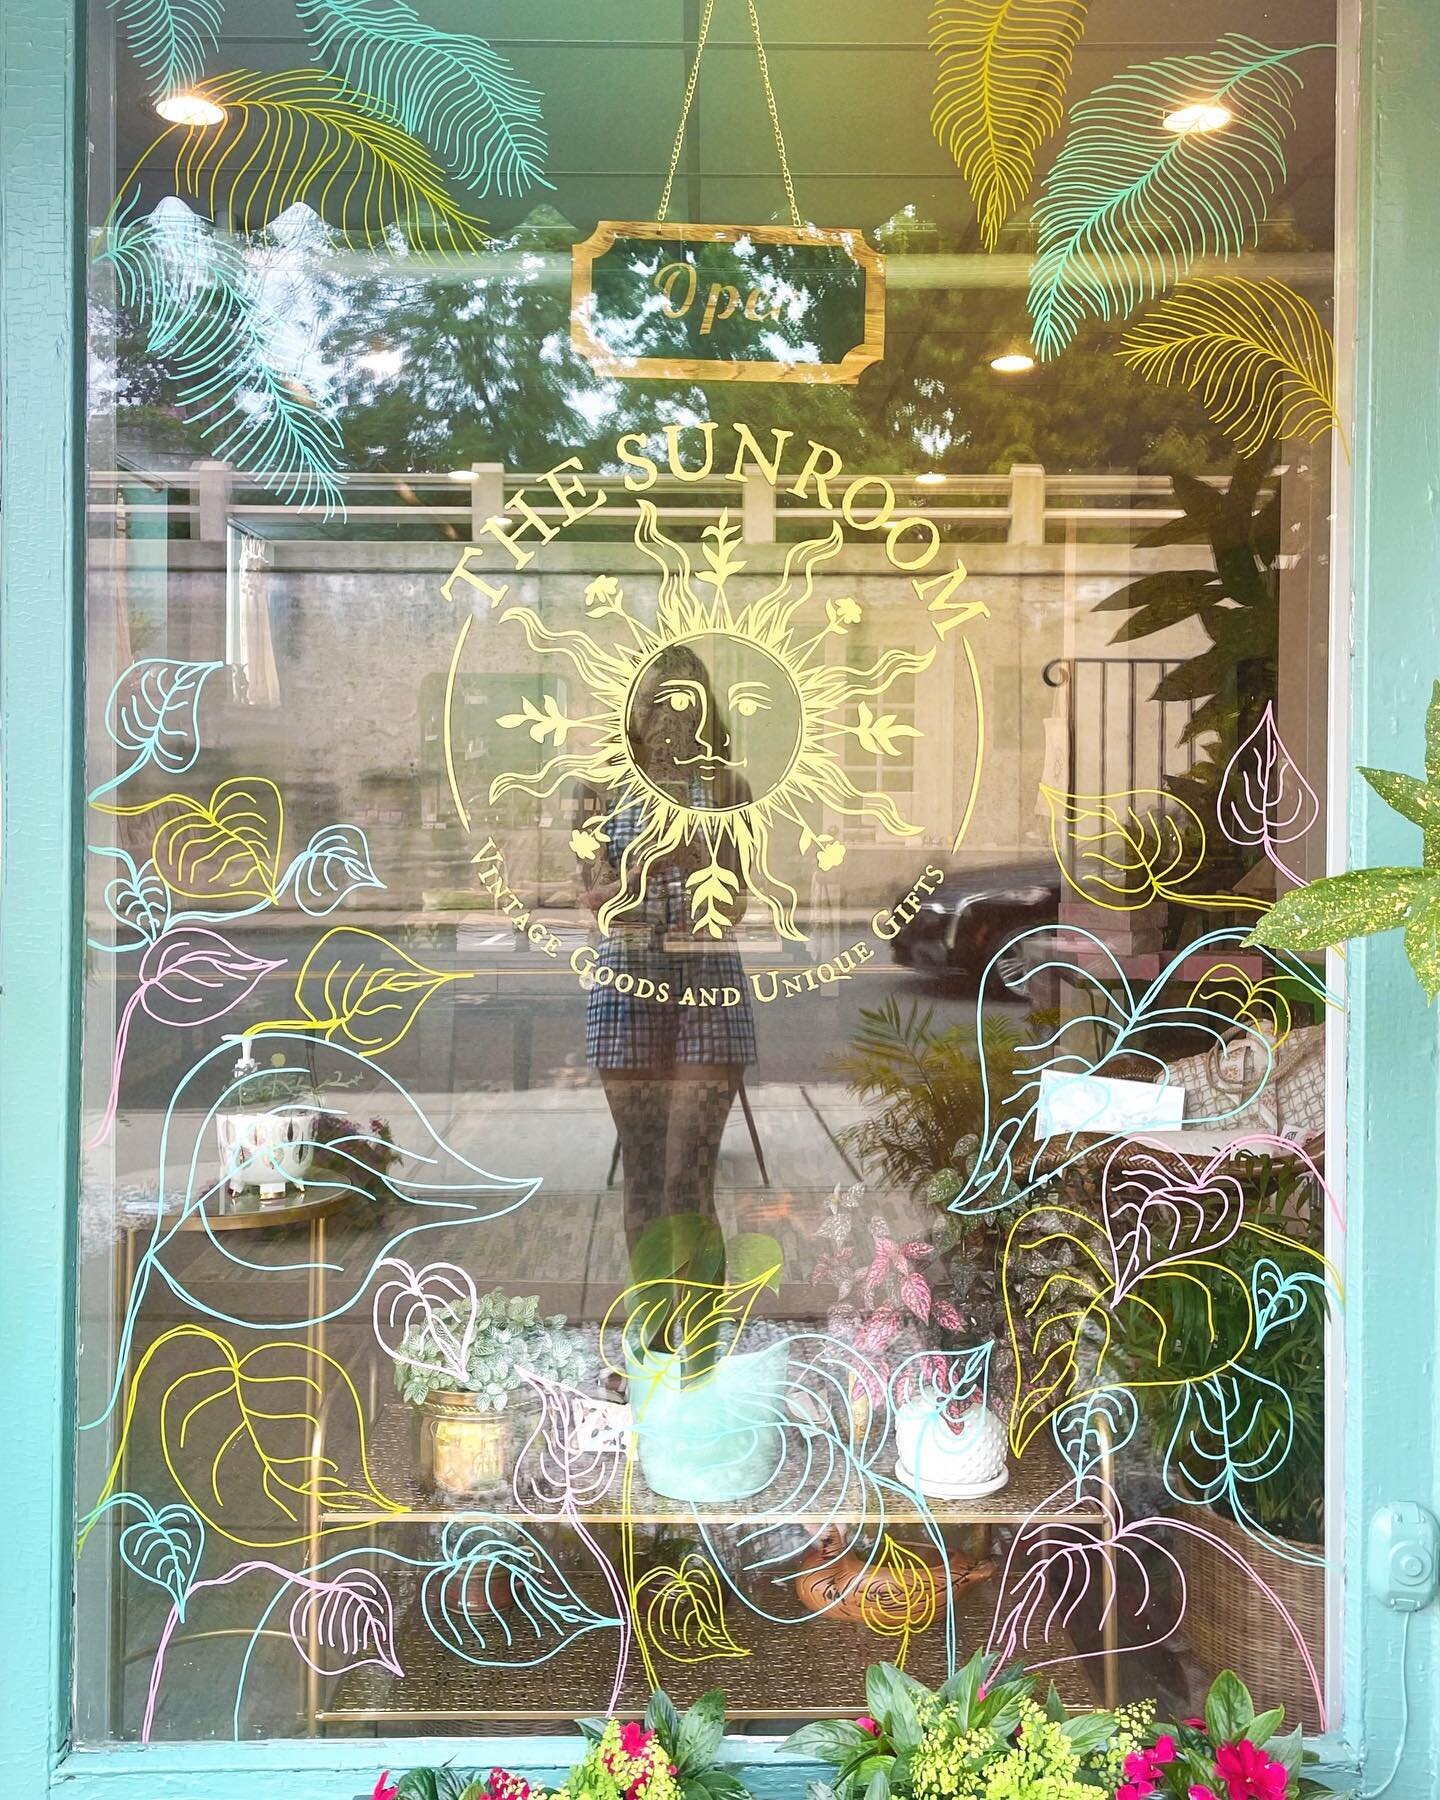 New leafy window painting to welcome you in! Stay a while &amp; enjoy our AC.